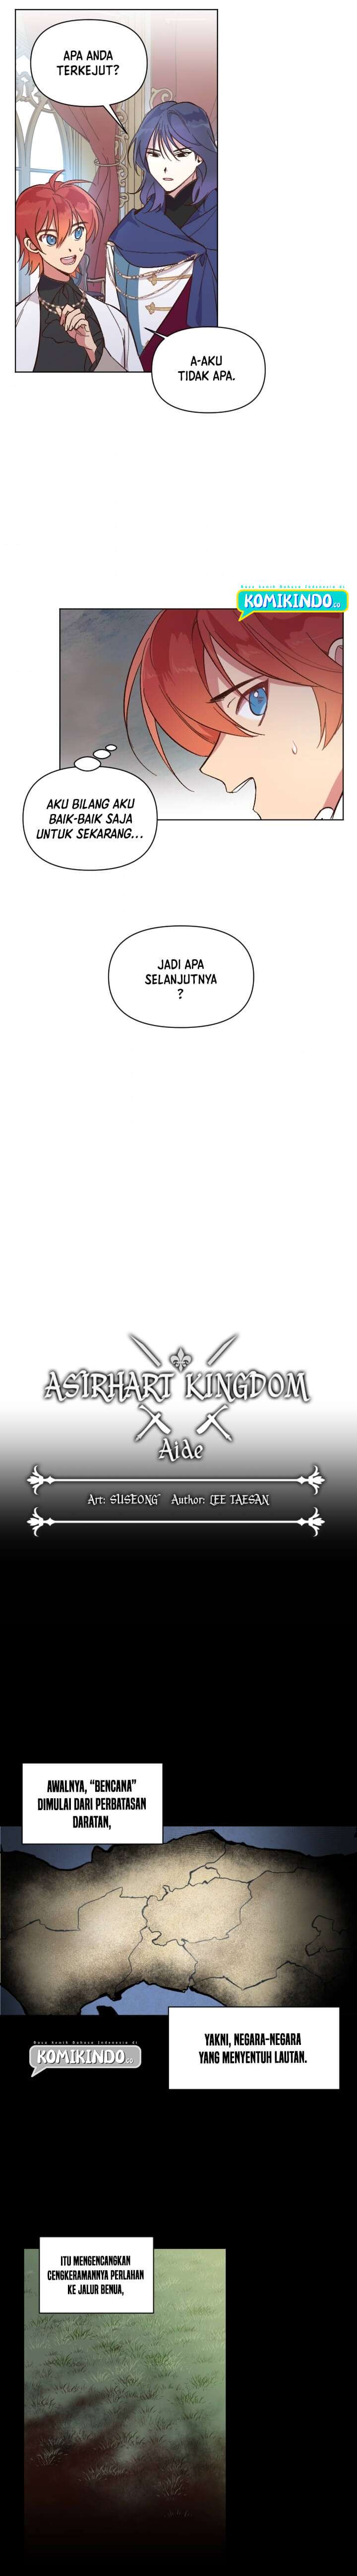 Asirhart Kingdom Aide Chapter 8